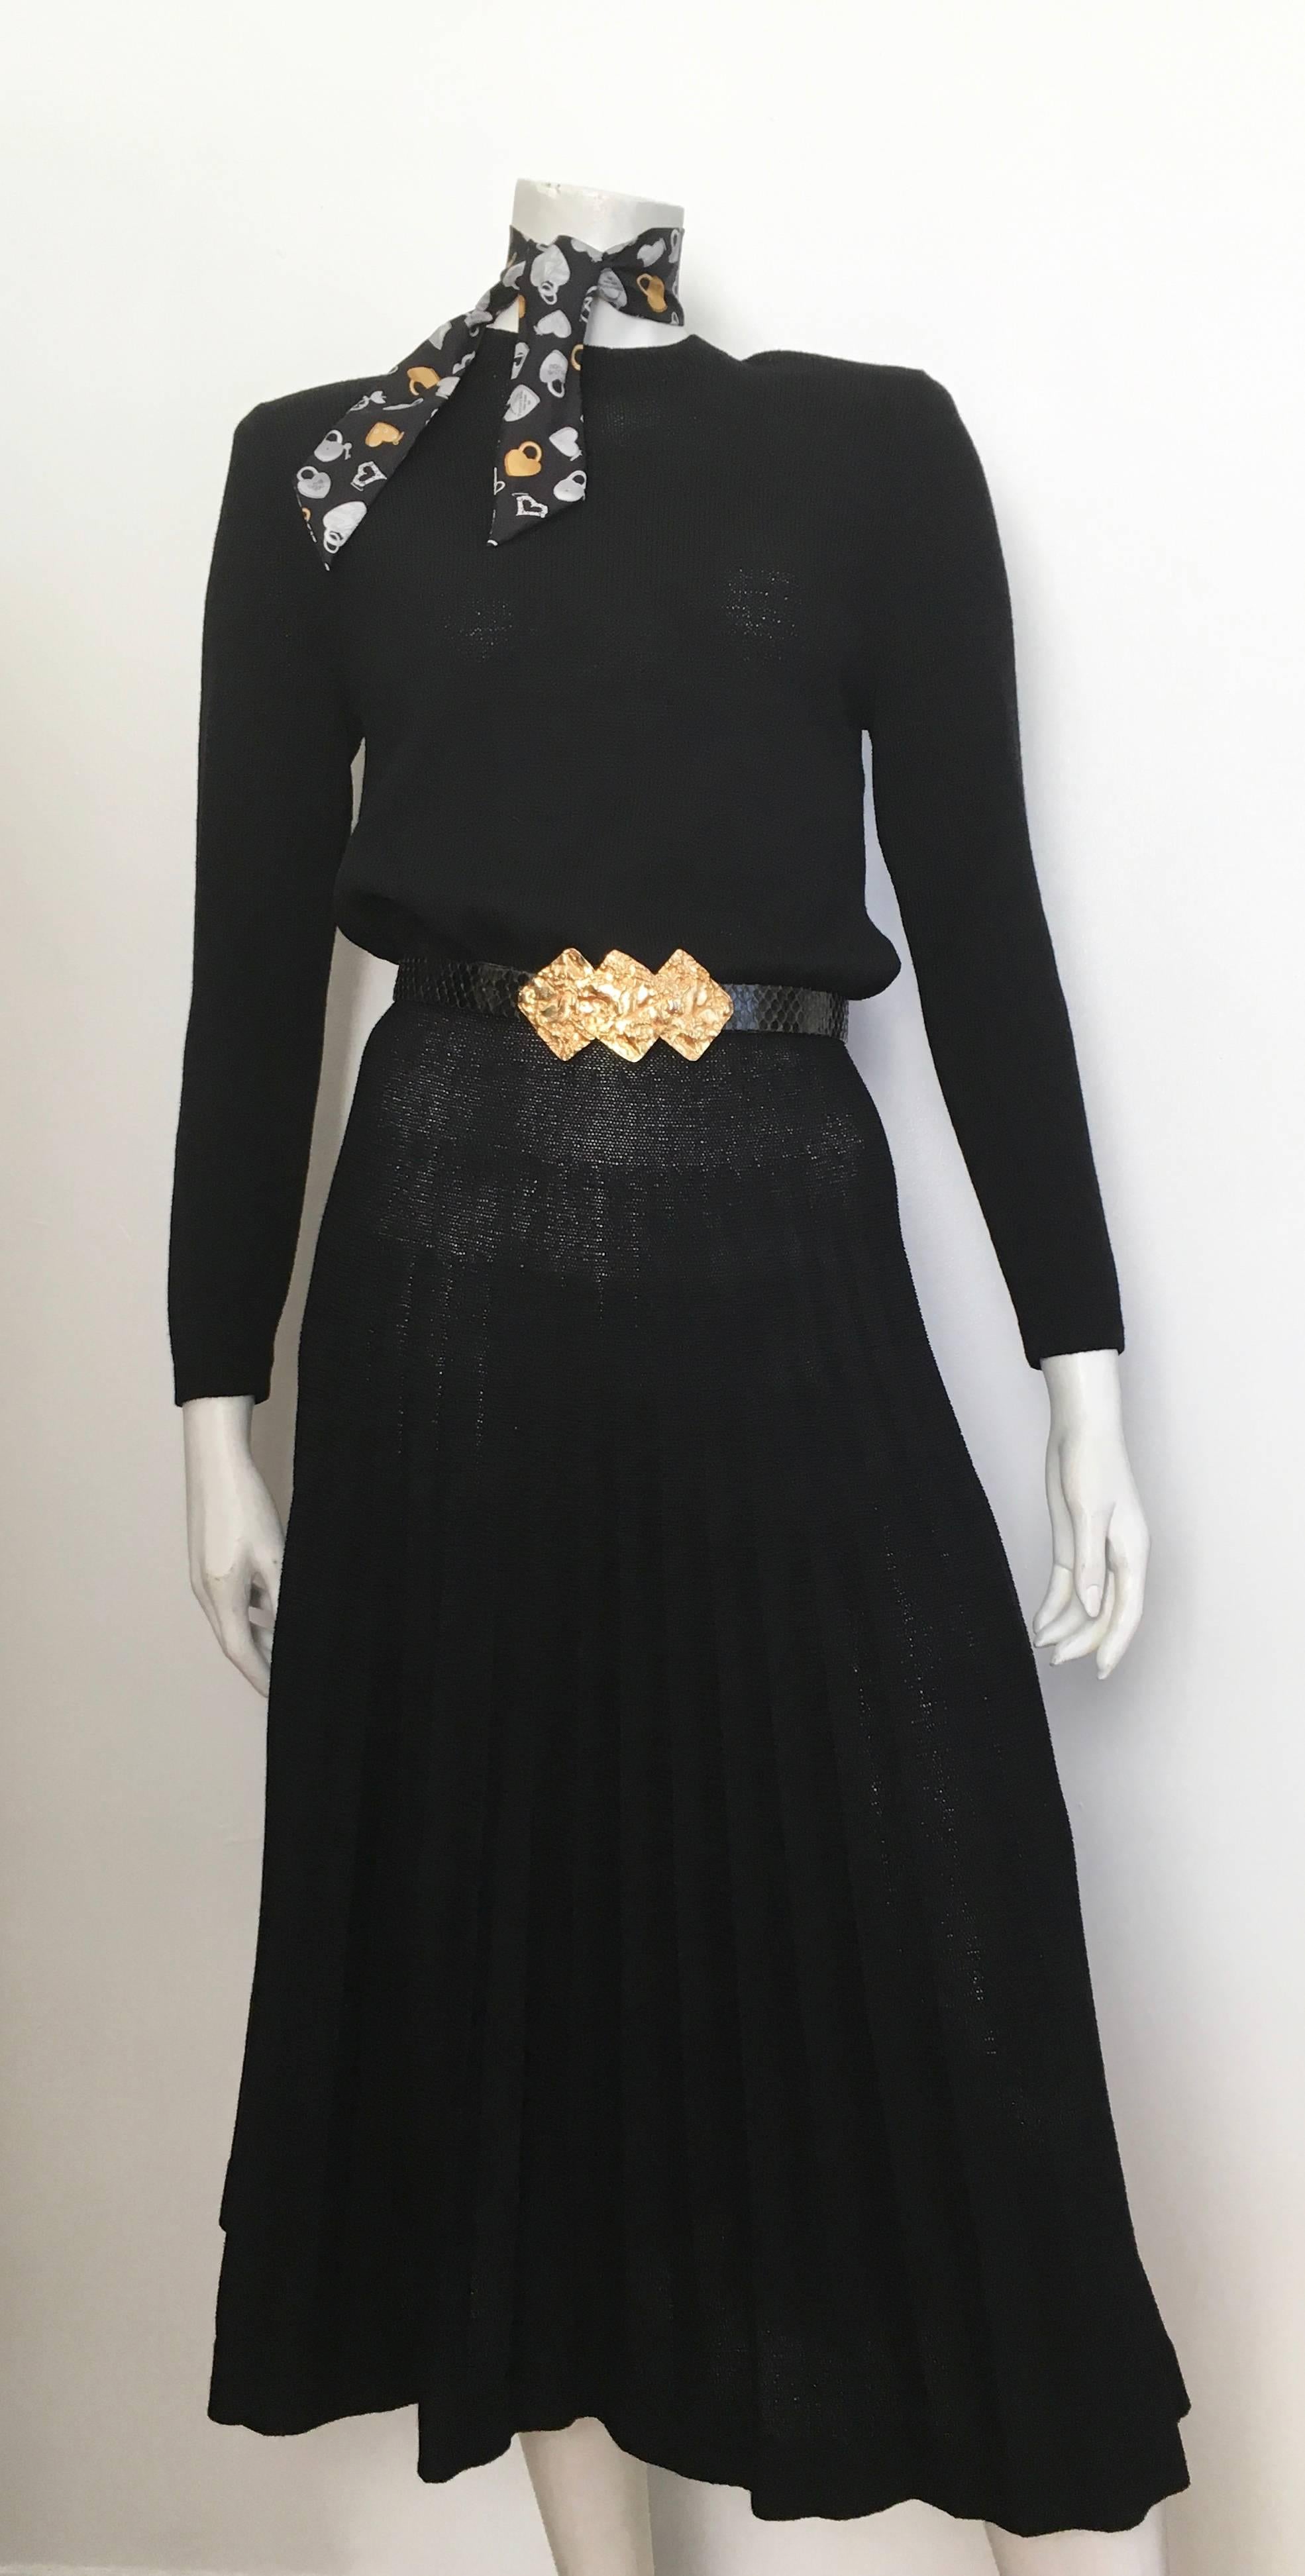 St. John for Neiman Marcus 1980s long sleeve black pleated knit dress is labeled a size 6 but will also fit a size 4.  The dress looks amazing on Matilda the Mannequin and she is a size 4.  Ladies make sure you have measured your bust, waist & hips